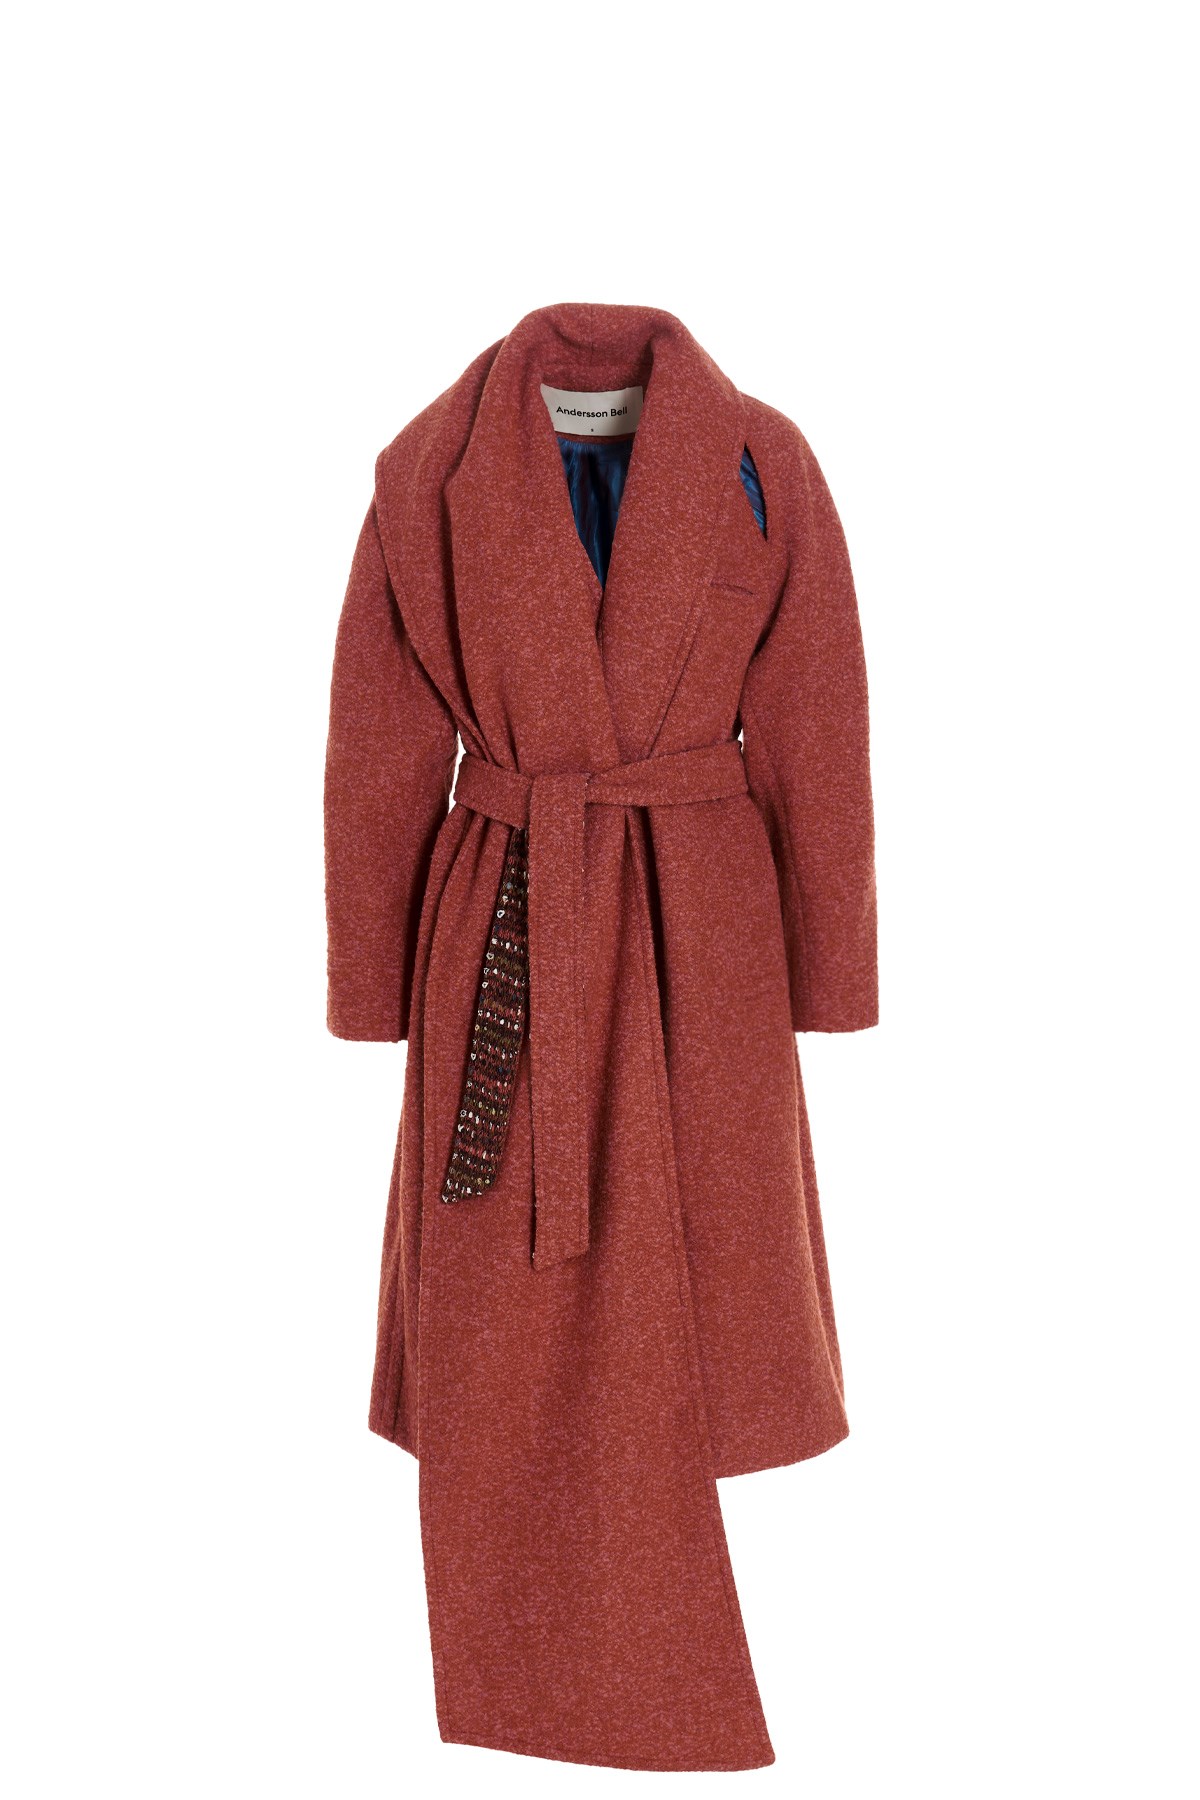 ANDERSSON BELL 'Lavina’ Coat